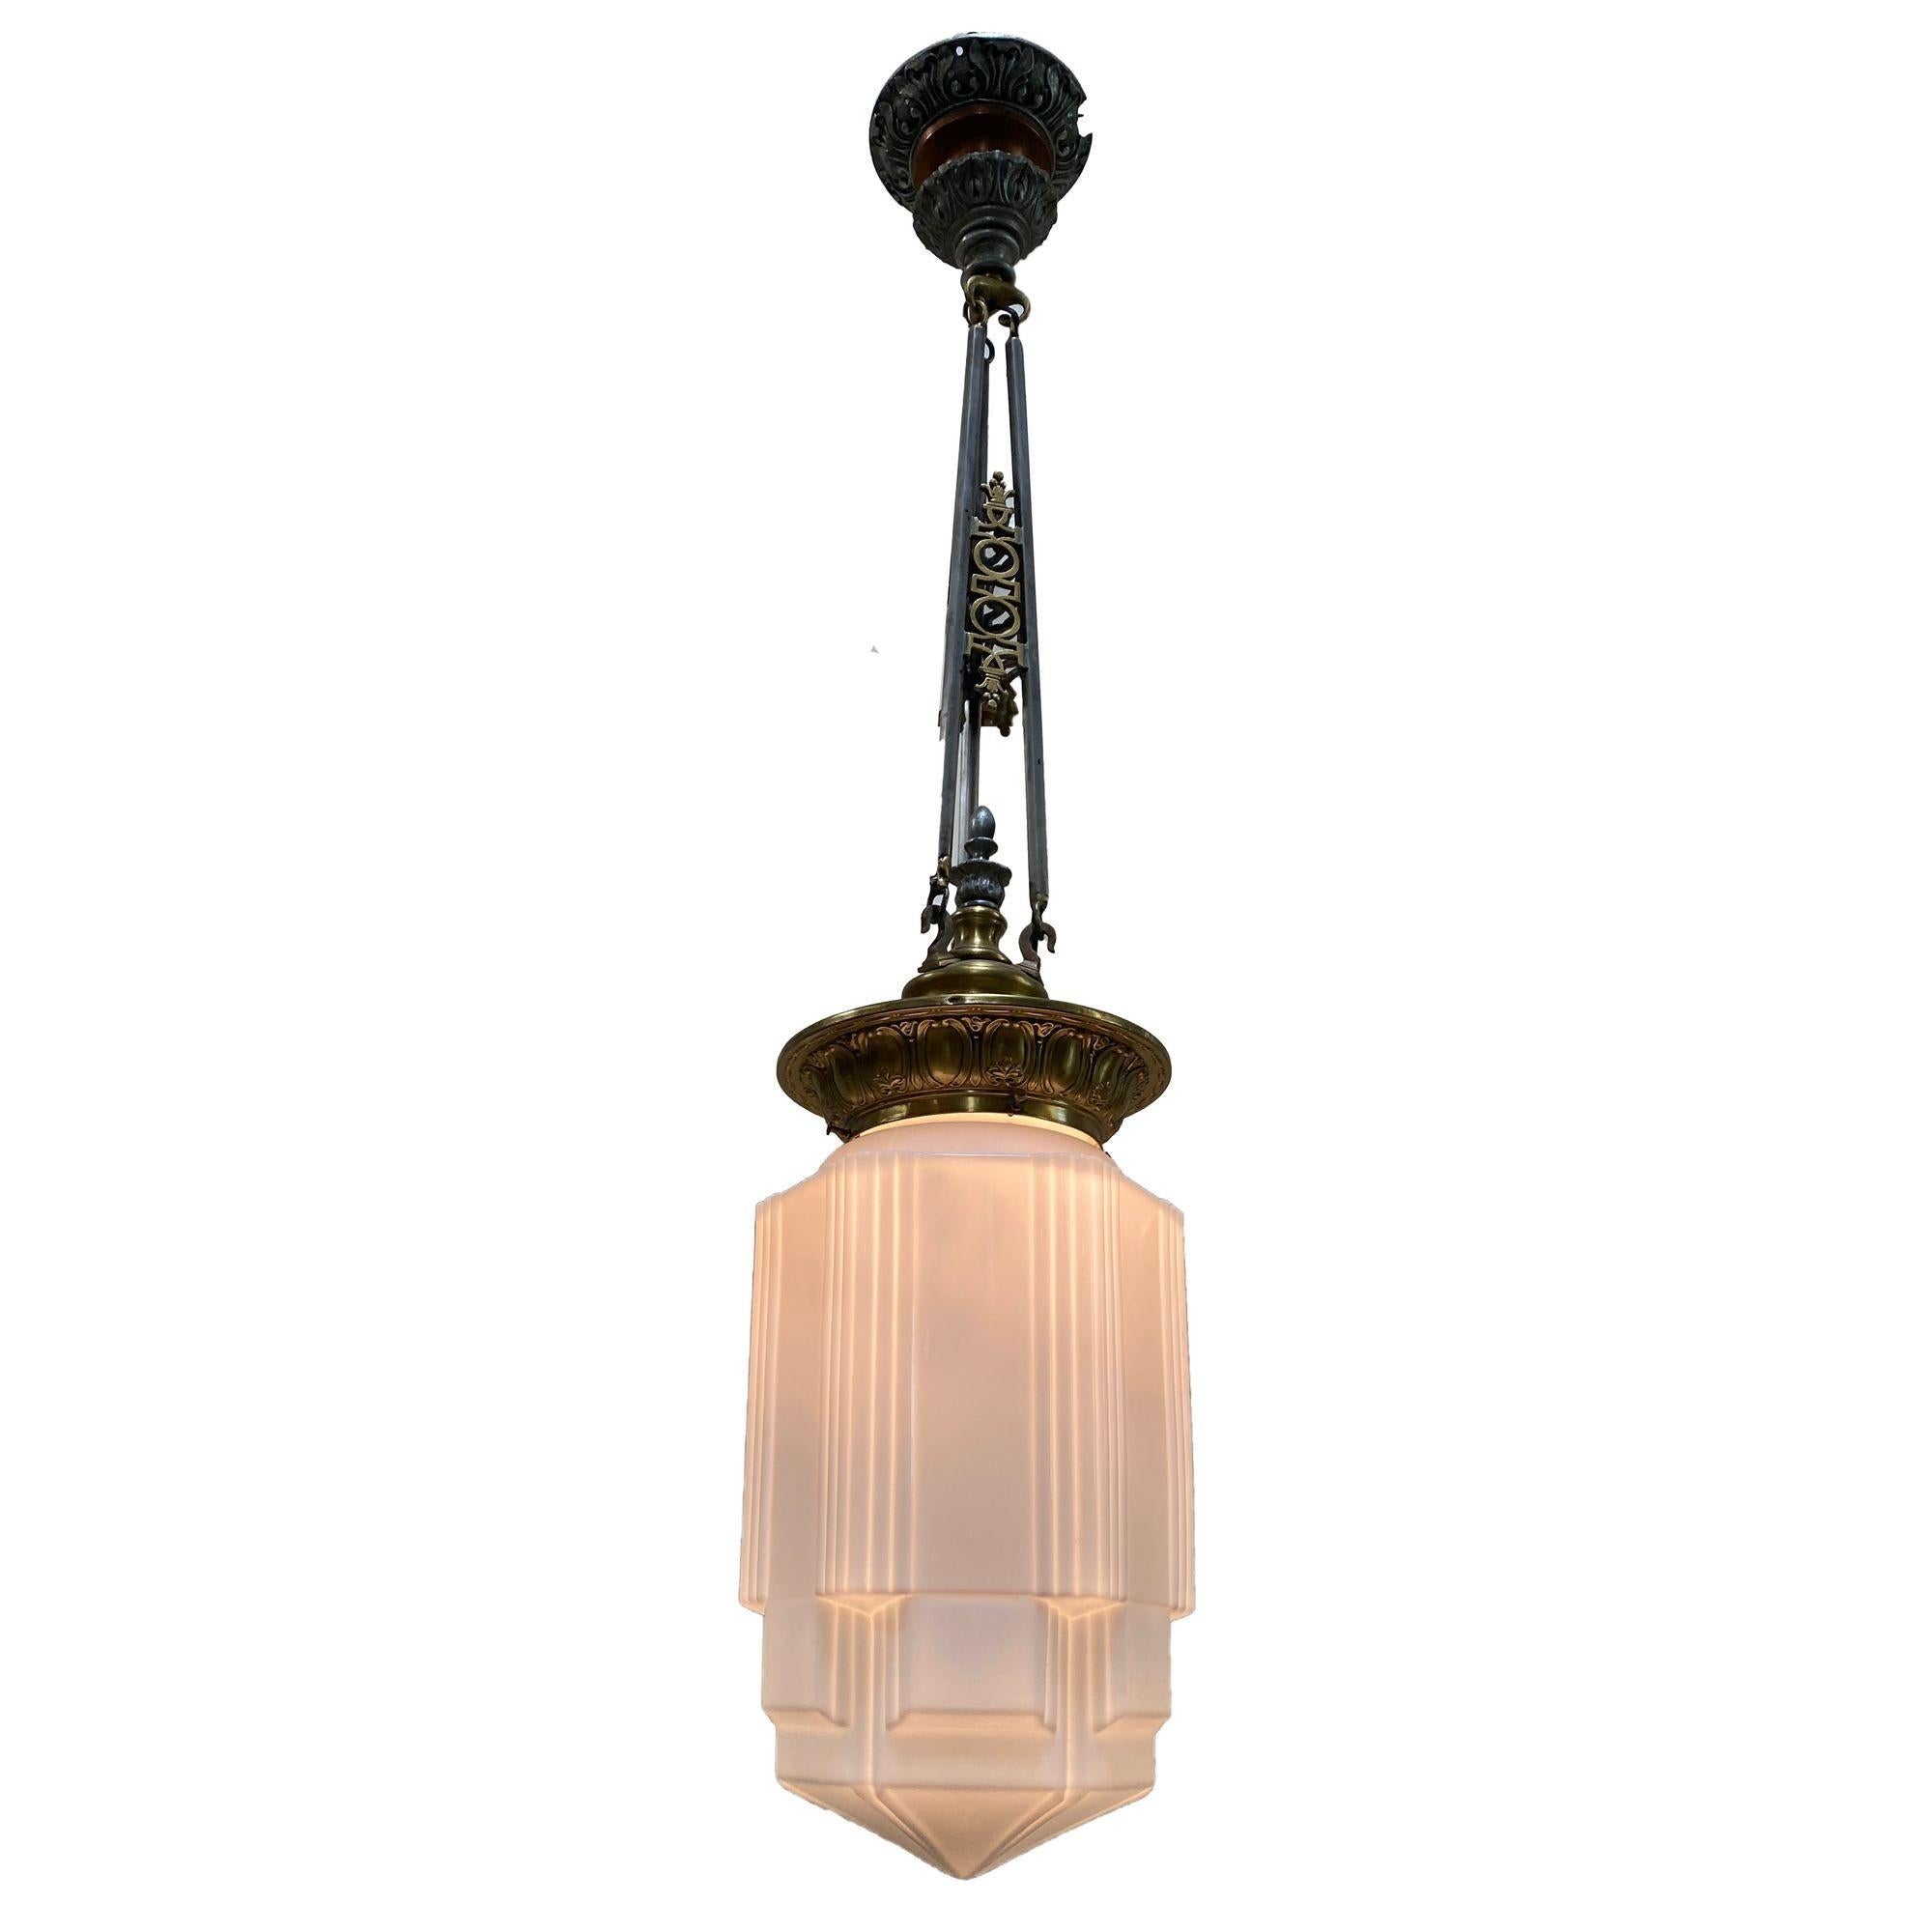 Set of 4 rare Empire Deco style ceiling pendants with stepped milk glass geometric school house style glass globe with a geometric Art Deco design.